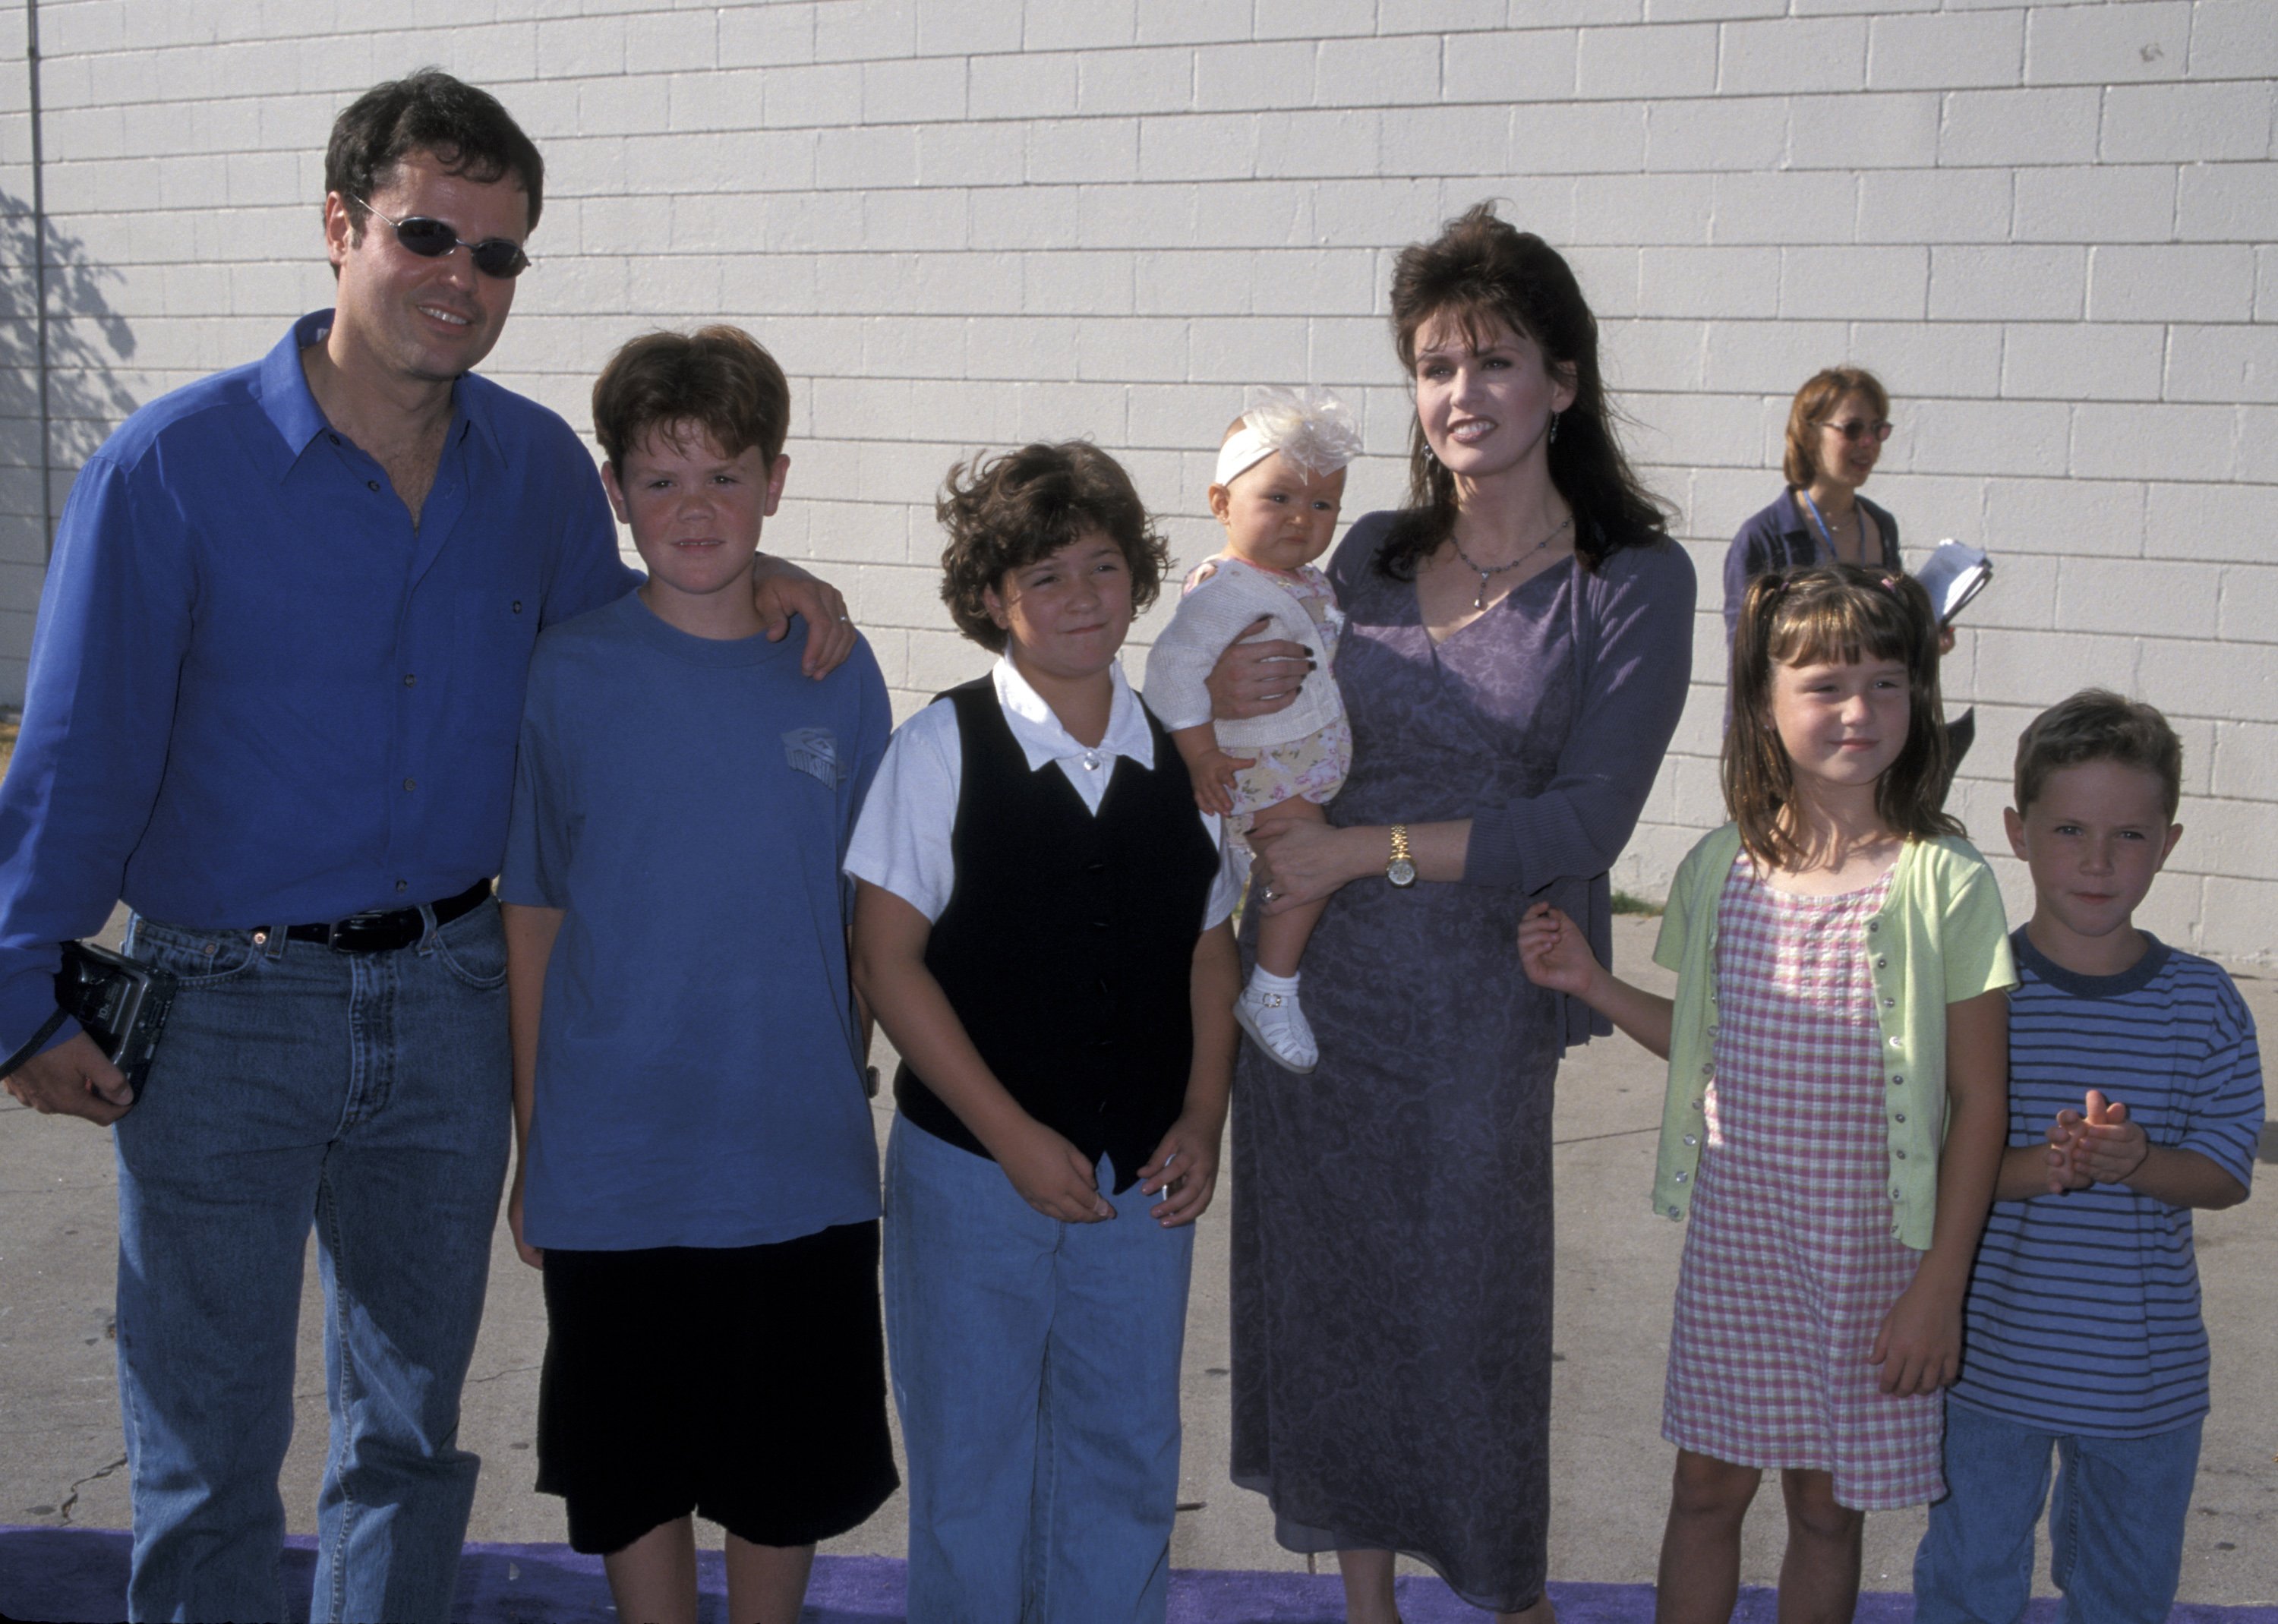 Singers Donny Osmond, Marie Osmond and children during Ringling Bros. Circus Opening Night Benefit at Sports Arena on July 2, 1998 in Los Angeles, California ┃Source: Getty Images